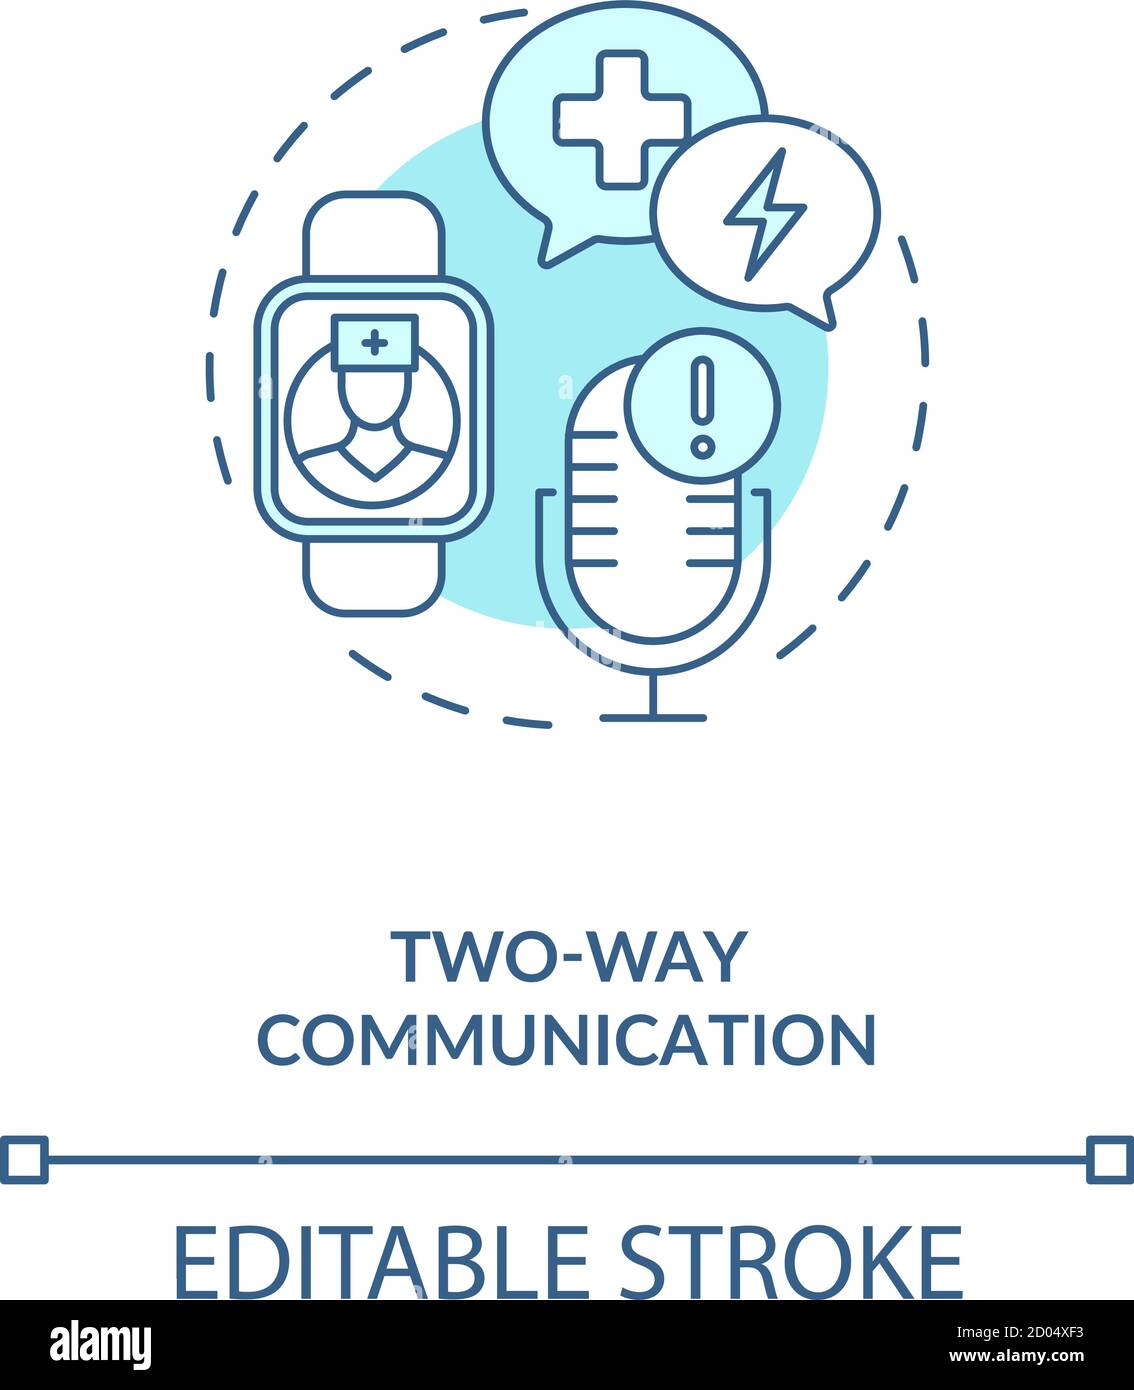 Two-way communication concept icon Stock Vector